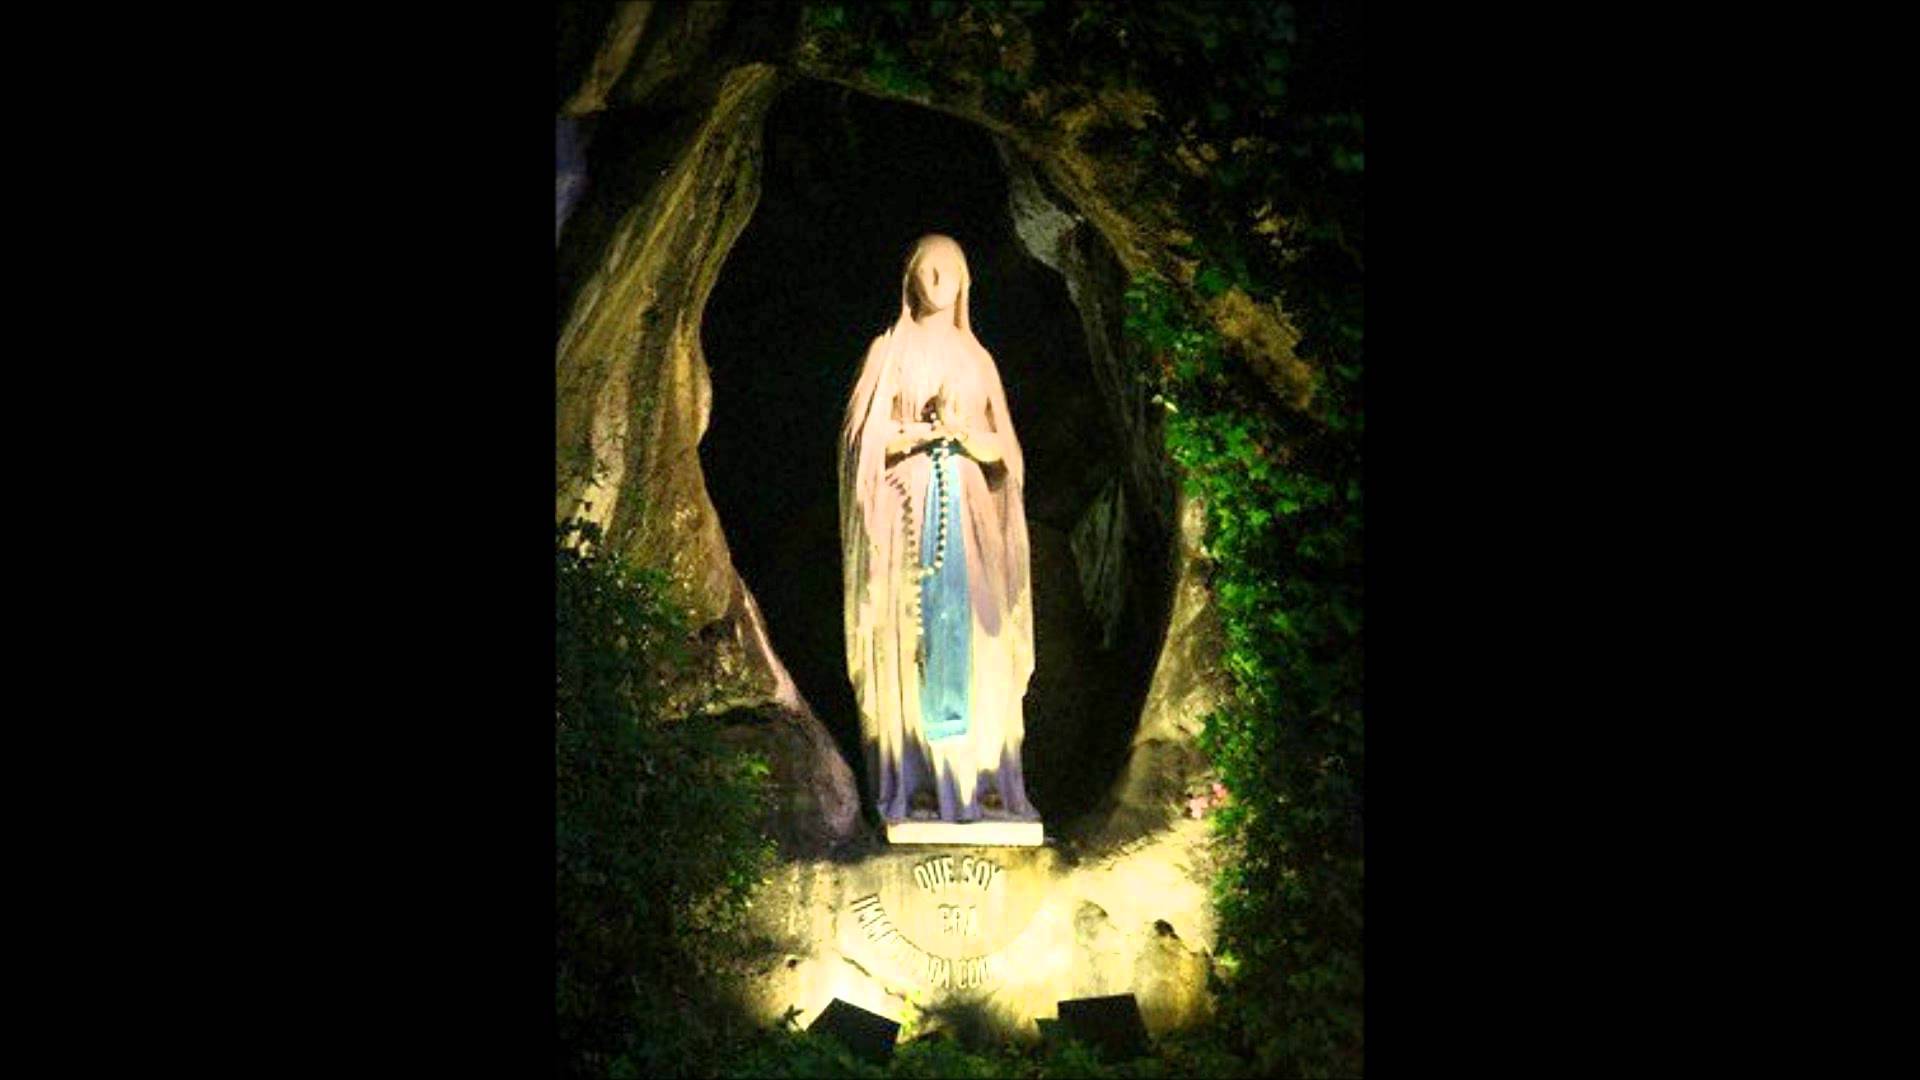 Our Lady of Lourdes hymn